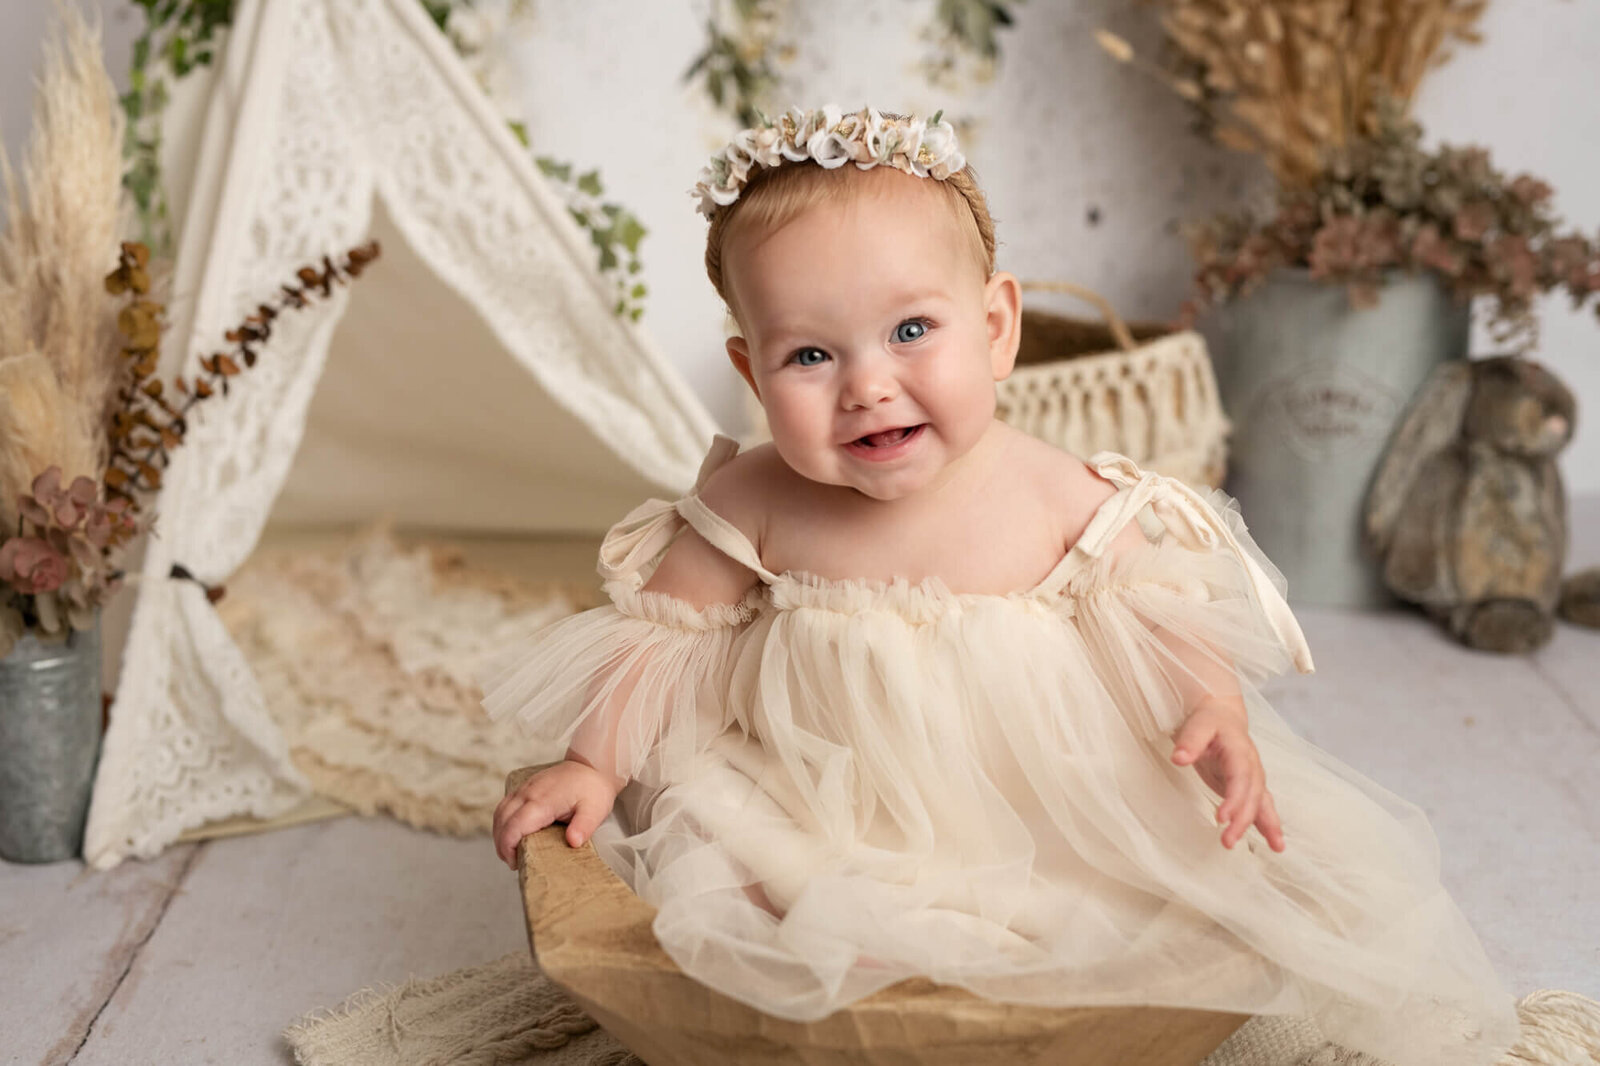 8 month old girl with tulle dress and wooden bowl